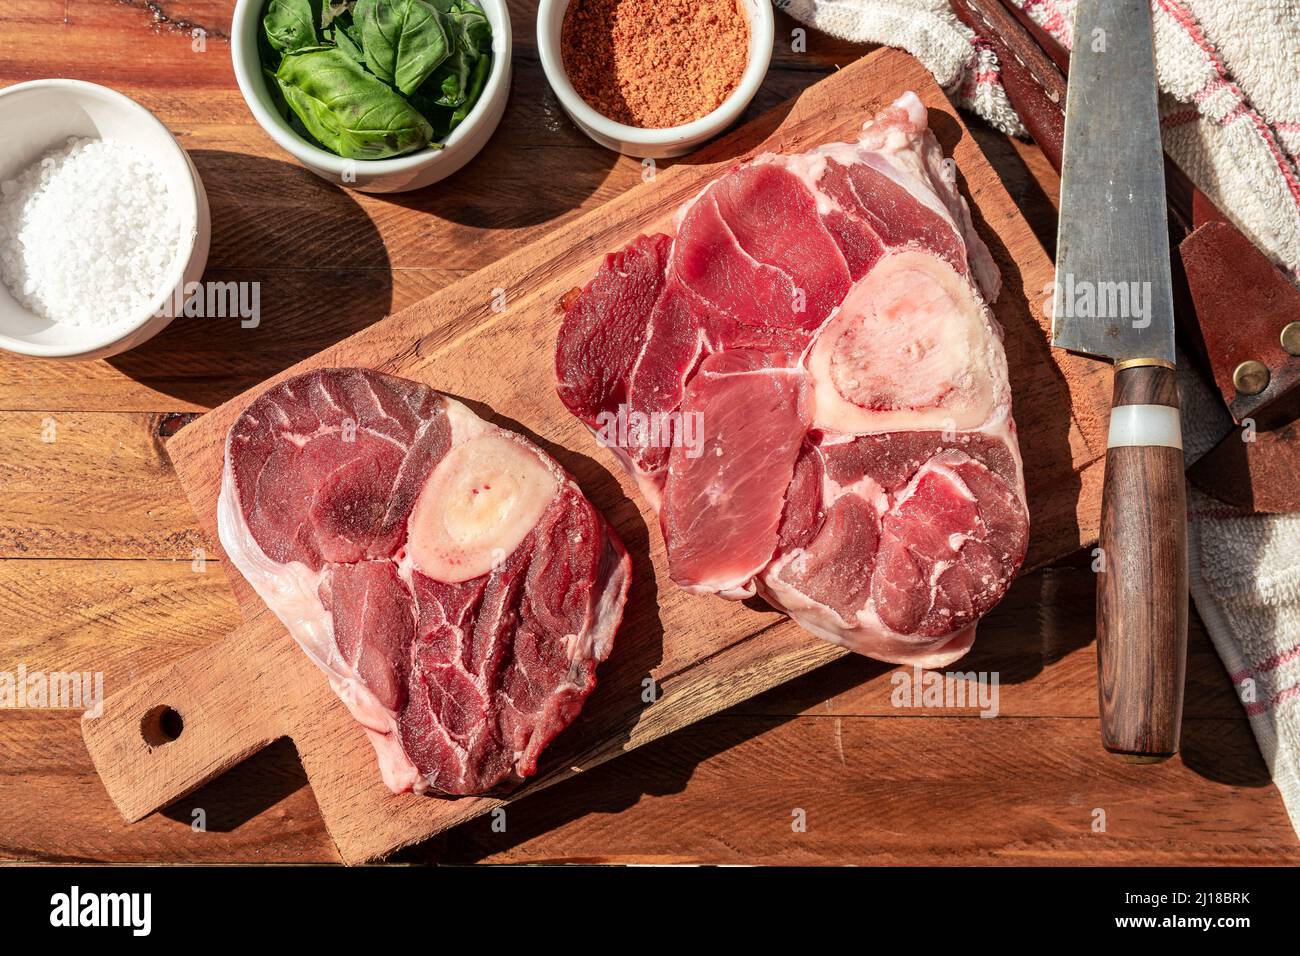 Two steaks of raw beef ossobuco on a wooden board with seasoning to flavour the pieces of meat. Animal protein concept, cheap cuts of beef. Aereal vie Stock Photo